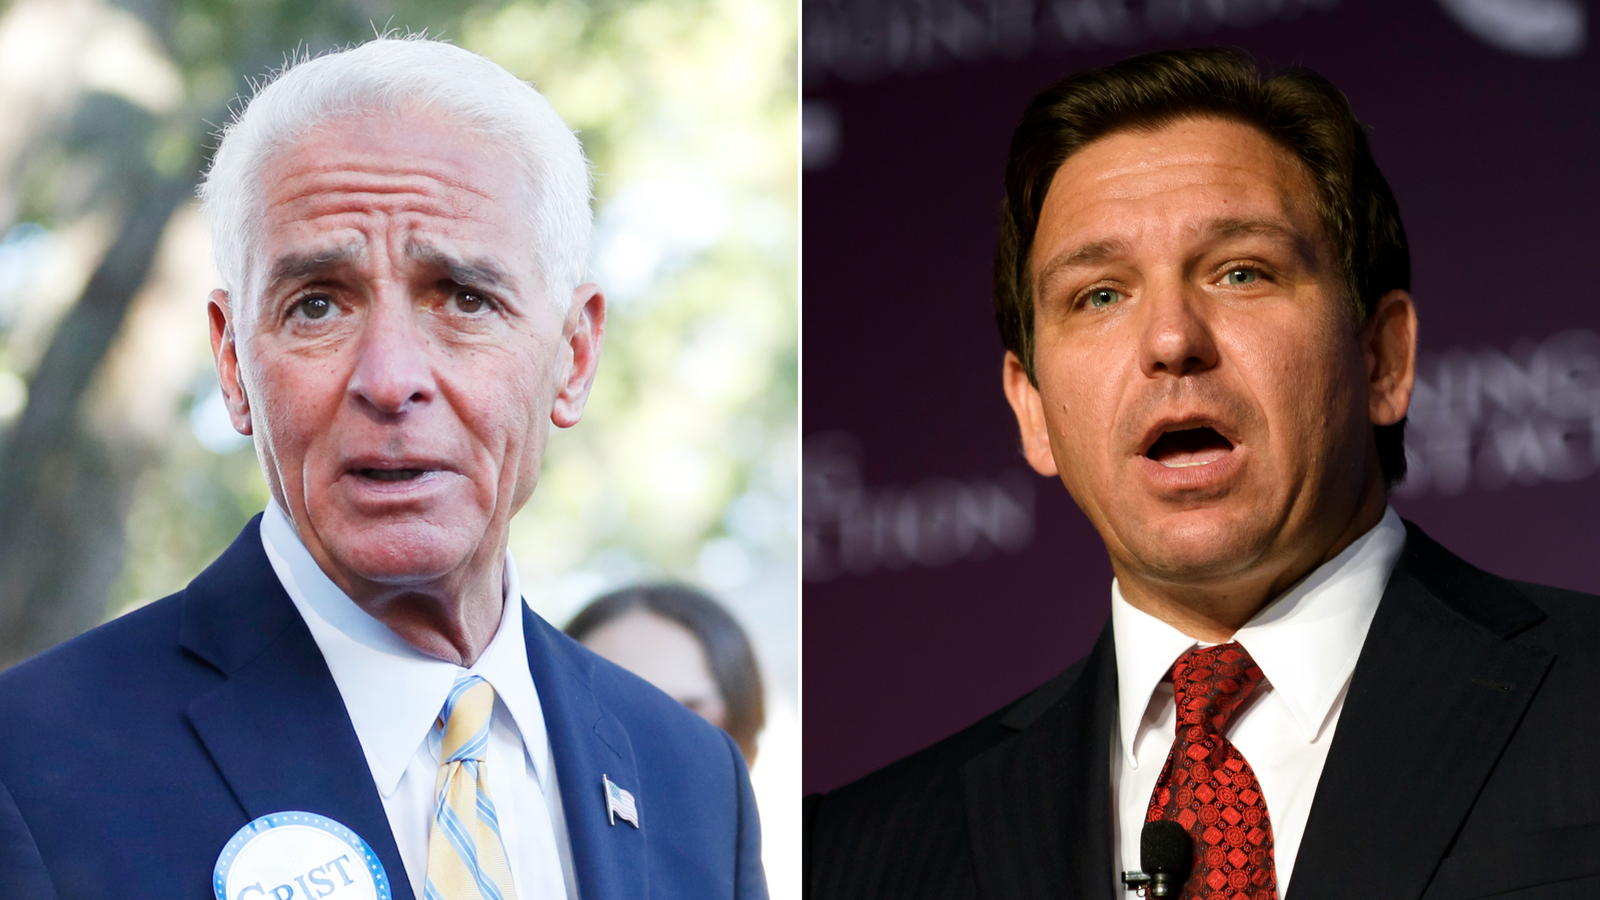 Democrats in Florida on Tuesday picked Rep. Charlie Crist, left, to take on Gov. Ron DeSantis in the fall, CNN projected.